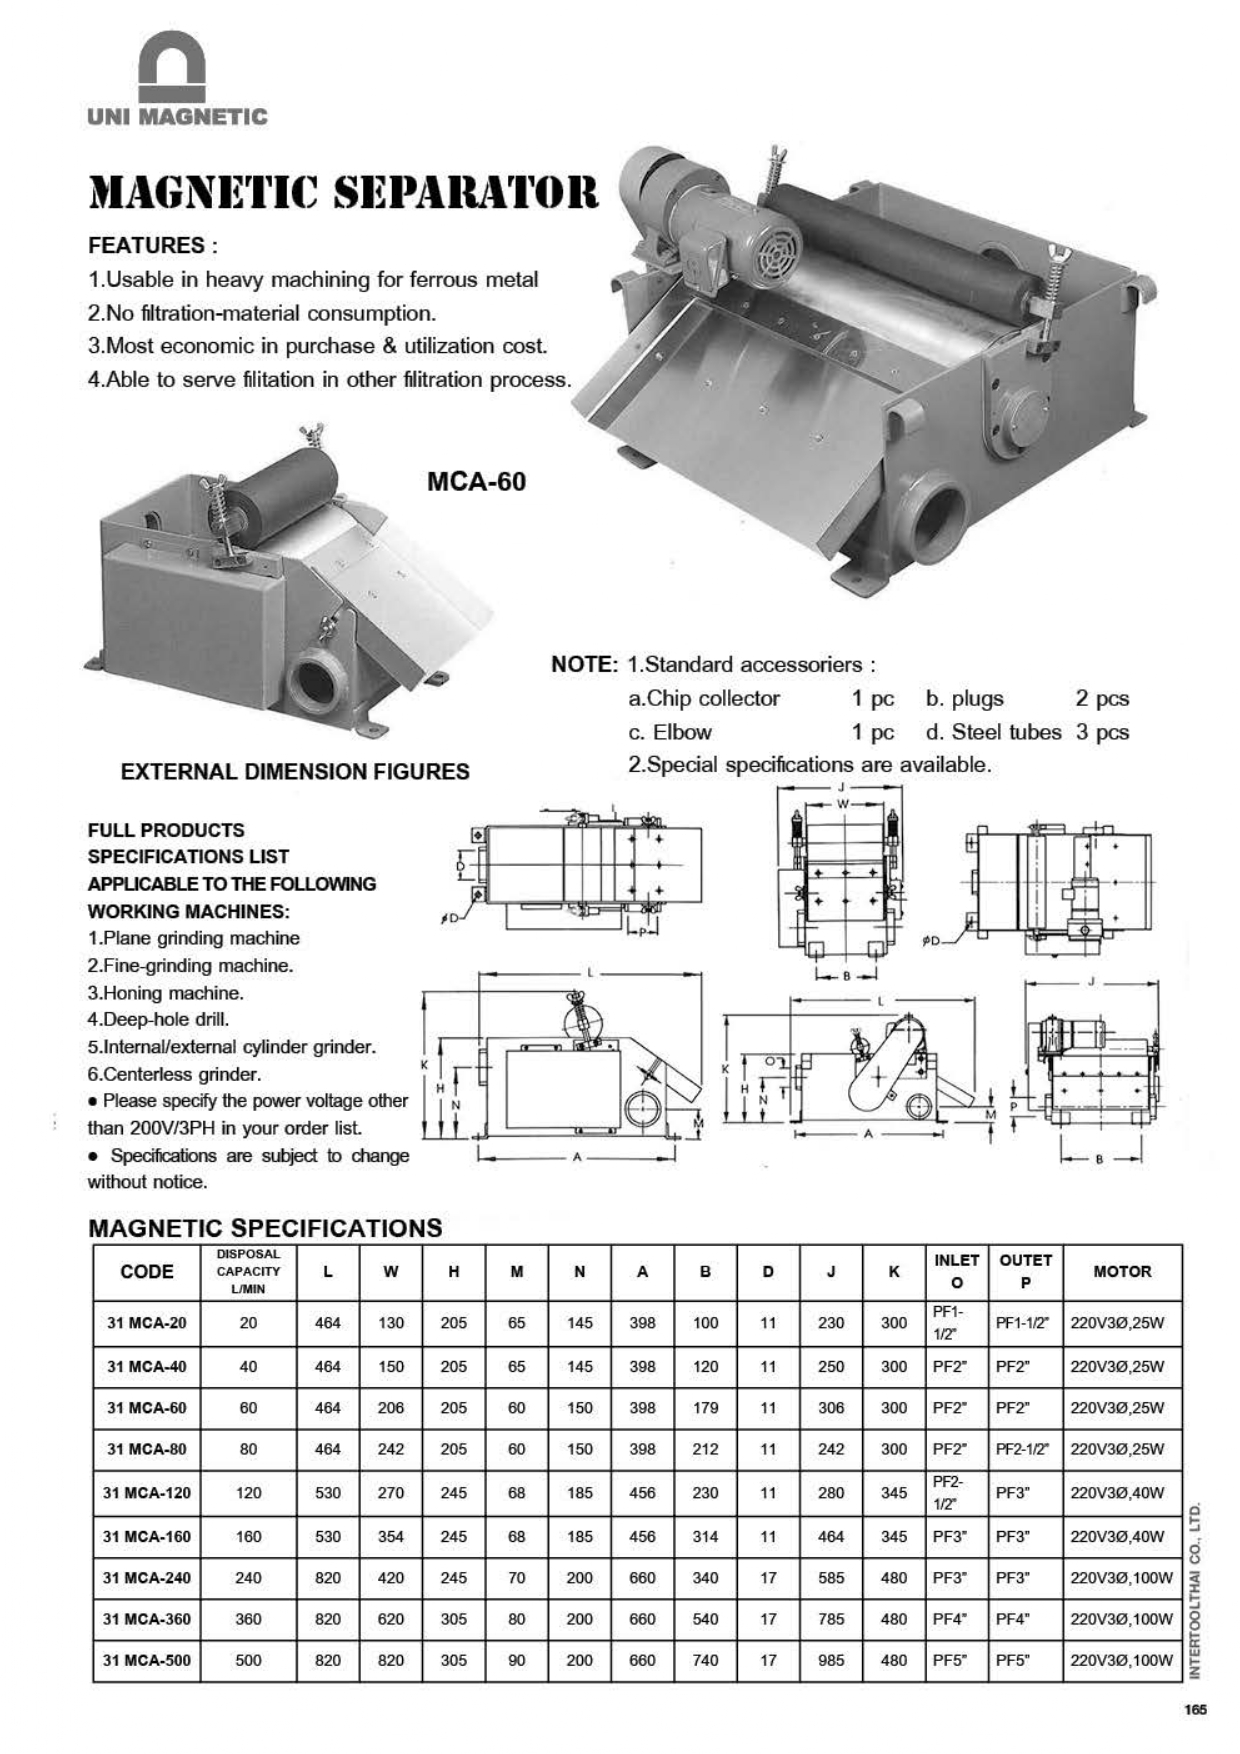 MCA-MAGNETIC SPECIFICATIONS